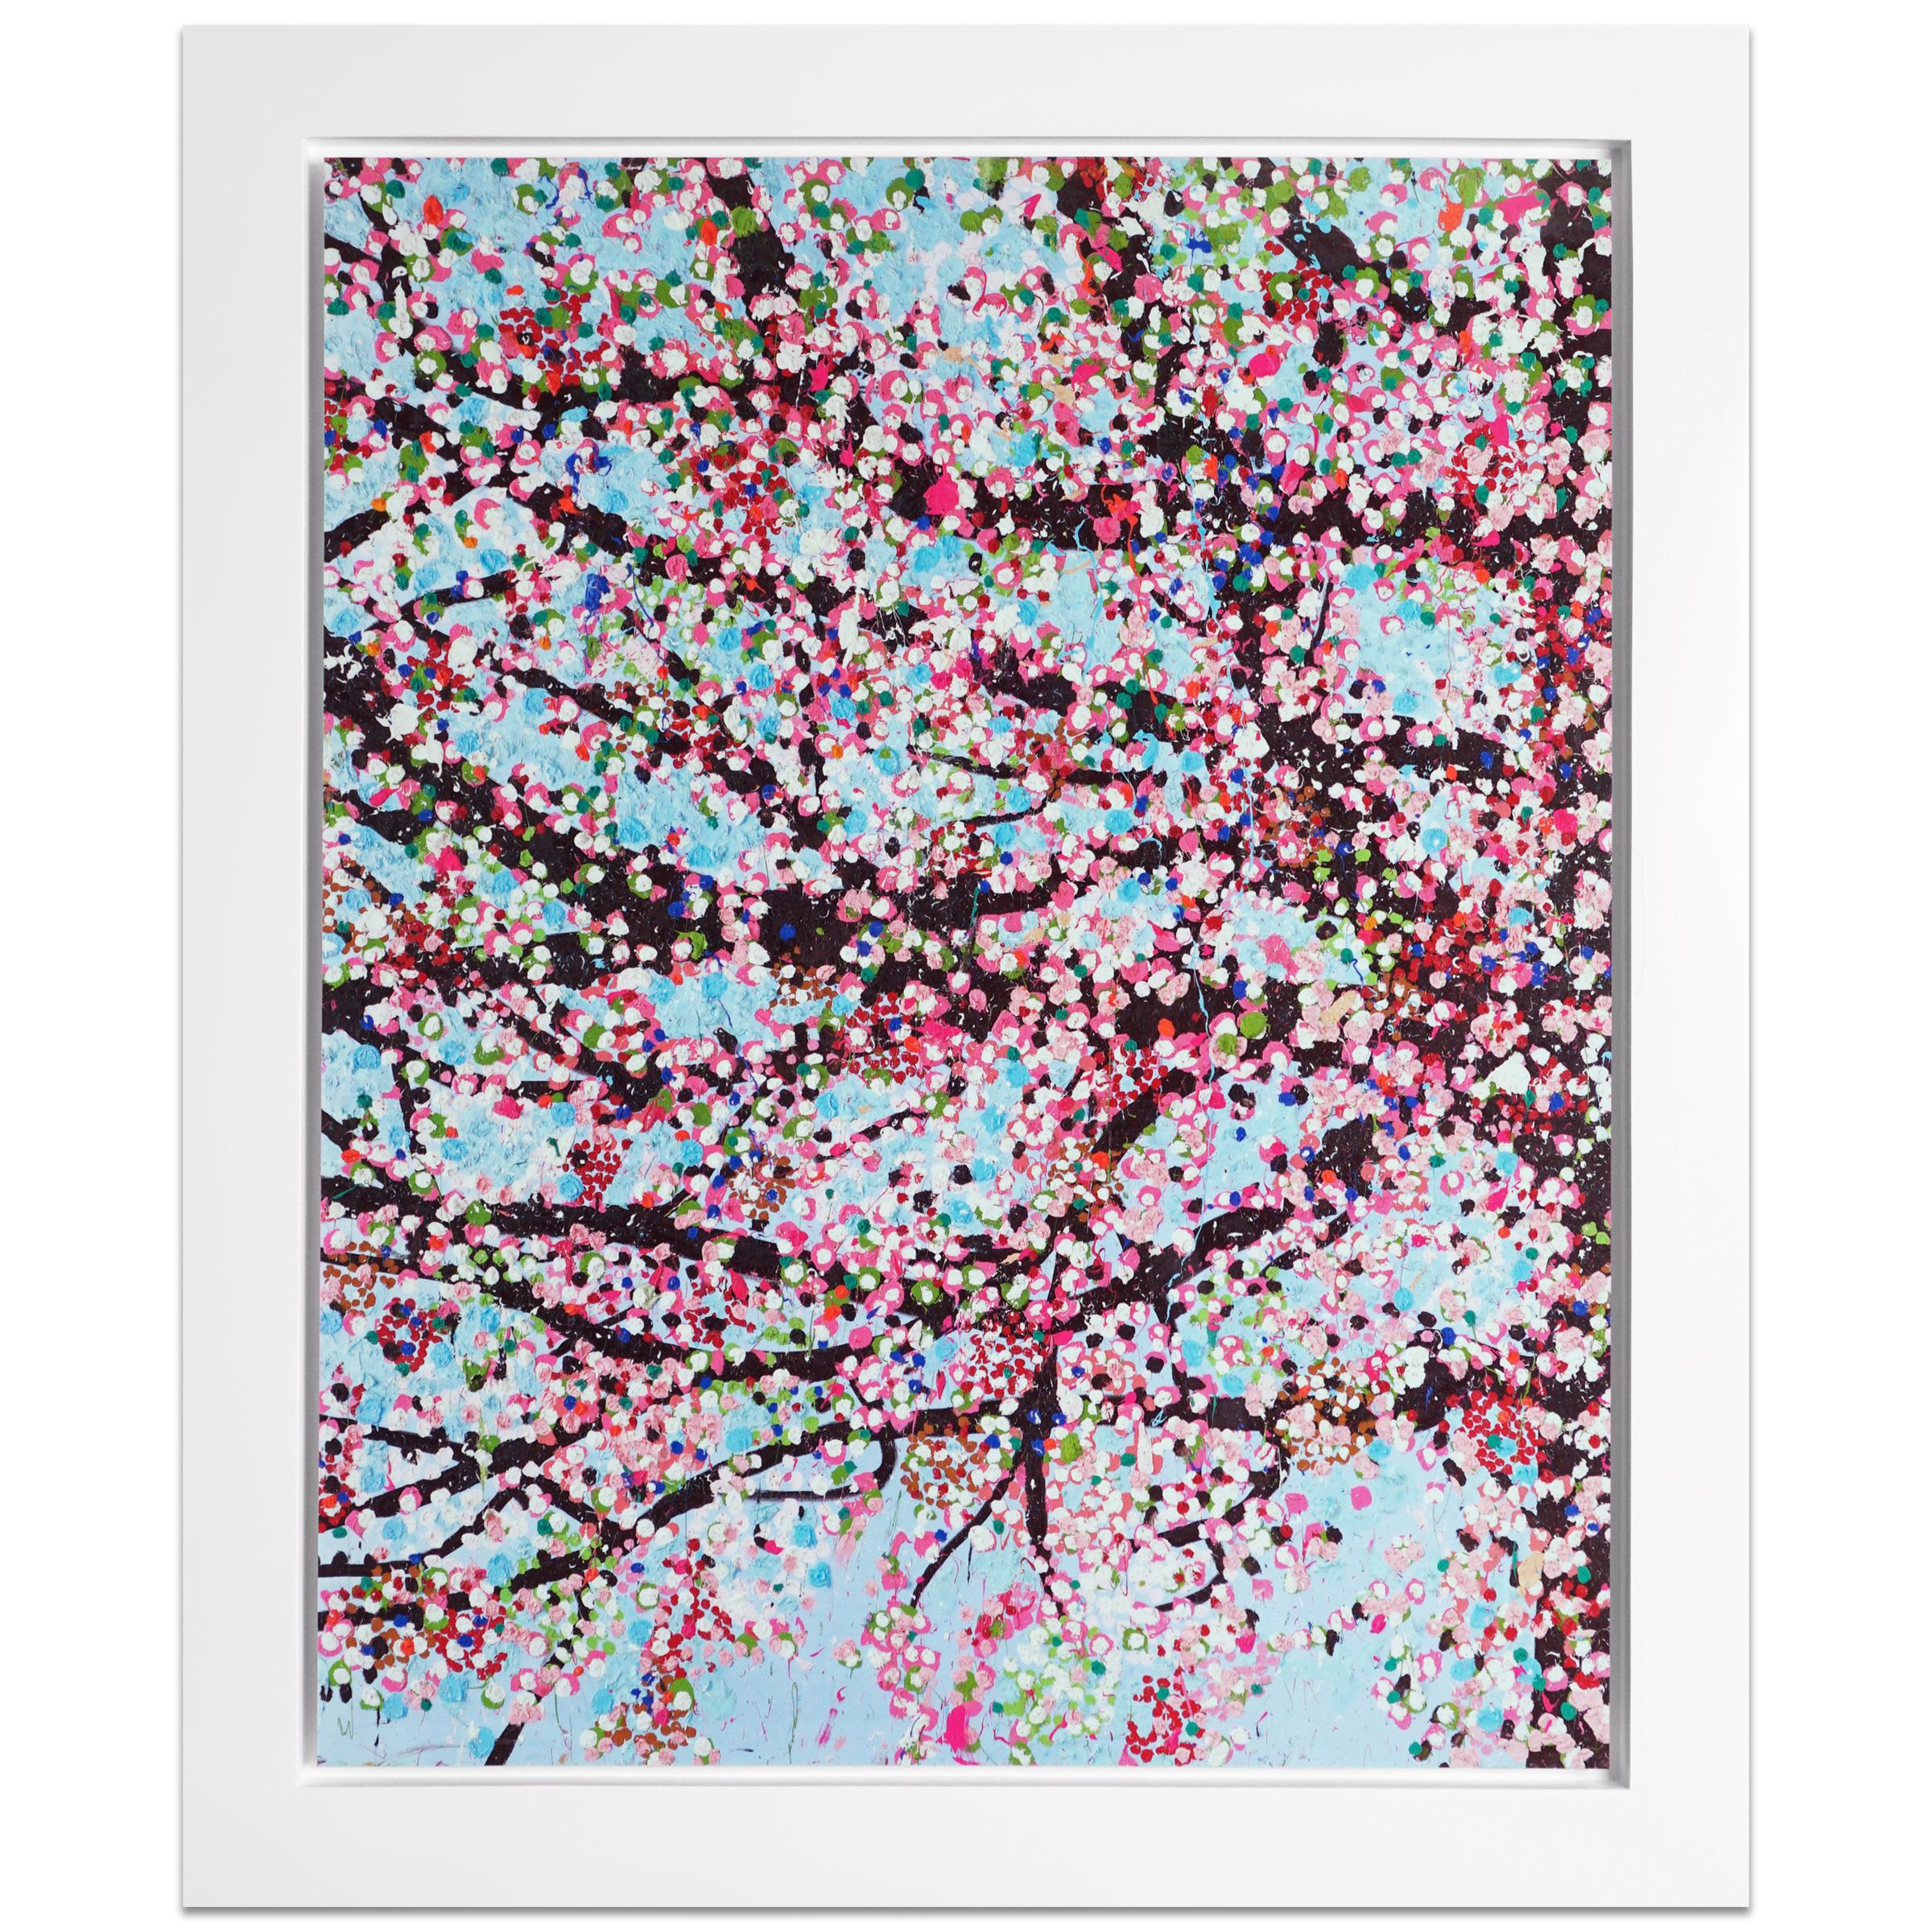 Damien Hirst Abstract Print - The Virtues 'Loyalty', Limited Edition 'Cherry Blossom' Landscape